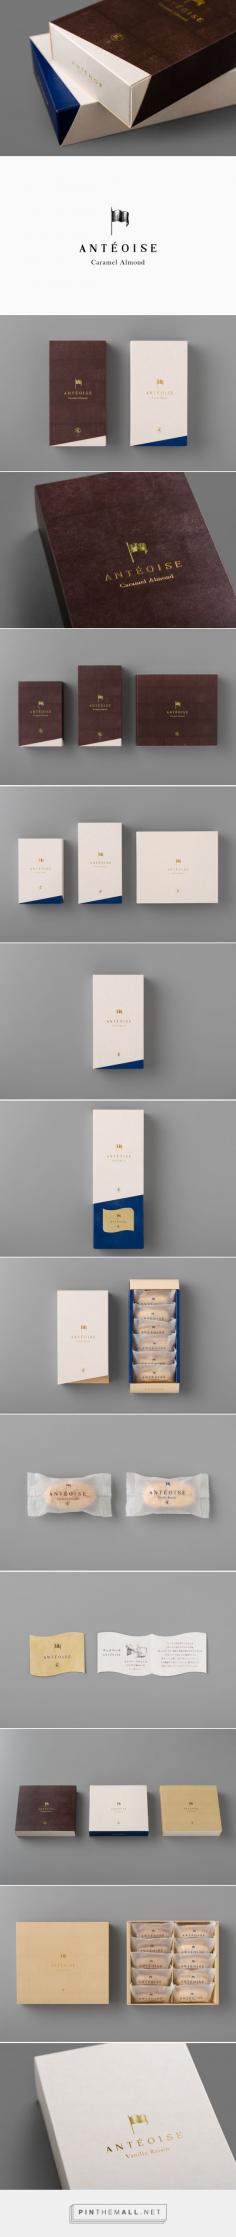 
                    
                        Packaging for Antéoise designed by UMA via BP&O curated by Packaging Diva PD. Antéoise is a creme dacquoise range from Anténor, a Japanese patisserie that creates French style cakes, cookies, tarts and variety of other confectionery.
                    
                